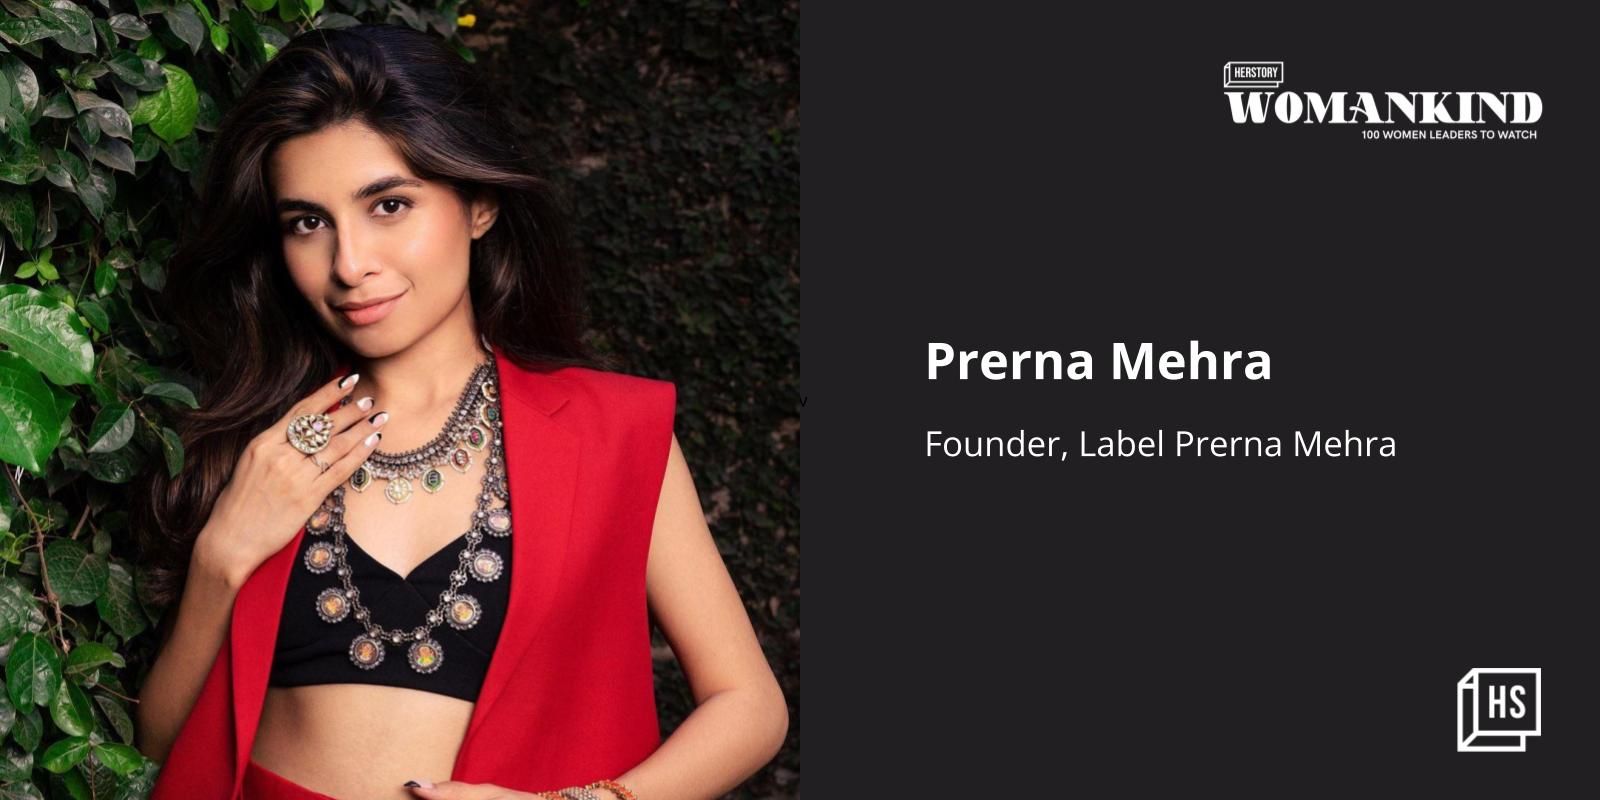 [100 Emerging Women Leaders] Meet Prerna Mehra, who started an Indian clothing brand at just 17